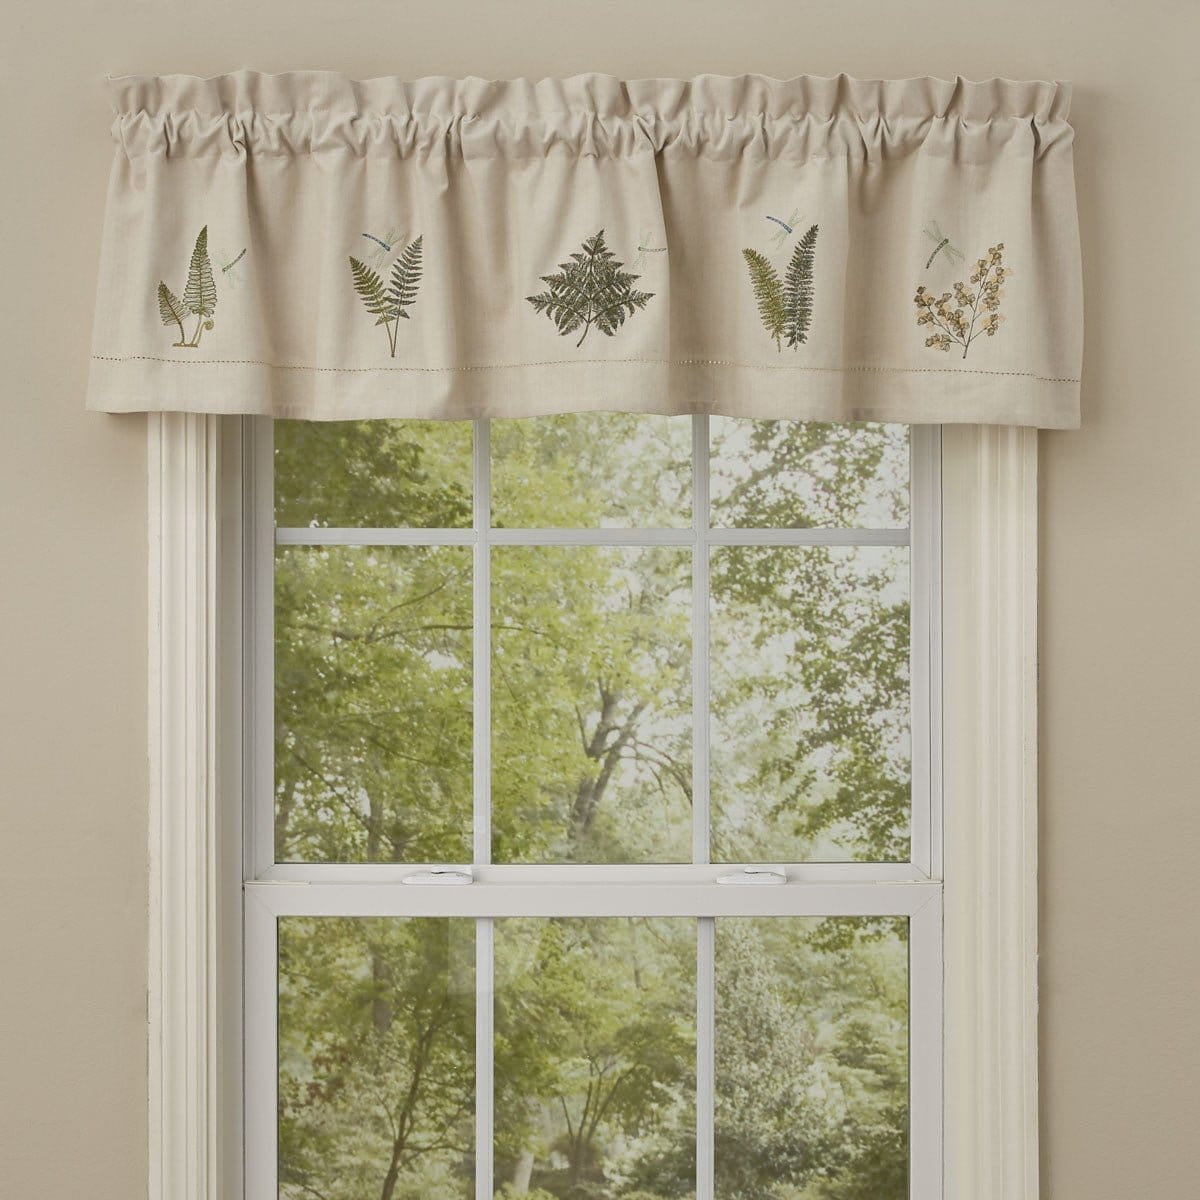 Embroidered dragonfly Valance 14" High Lined-Park Designs-The Village Merchant